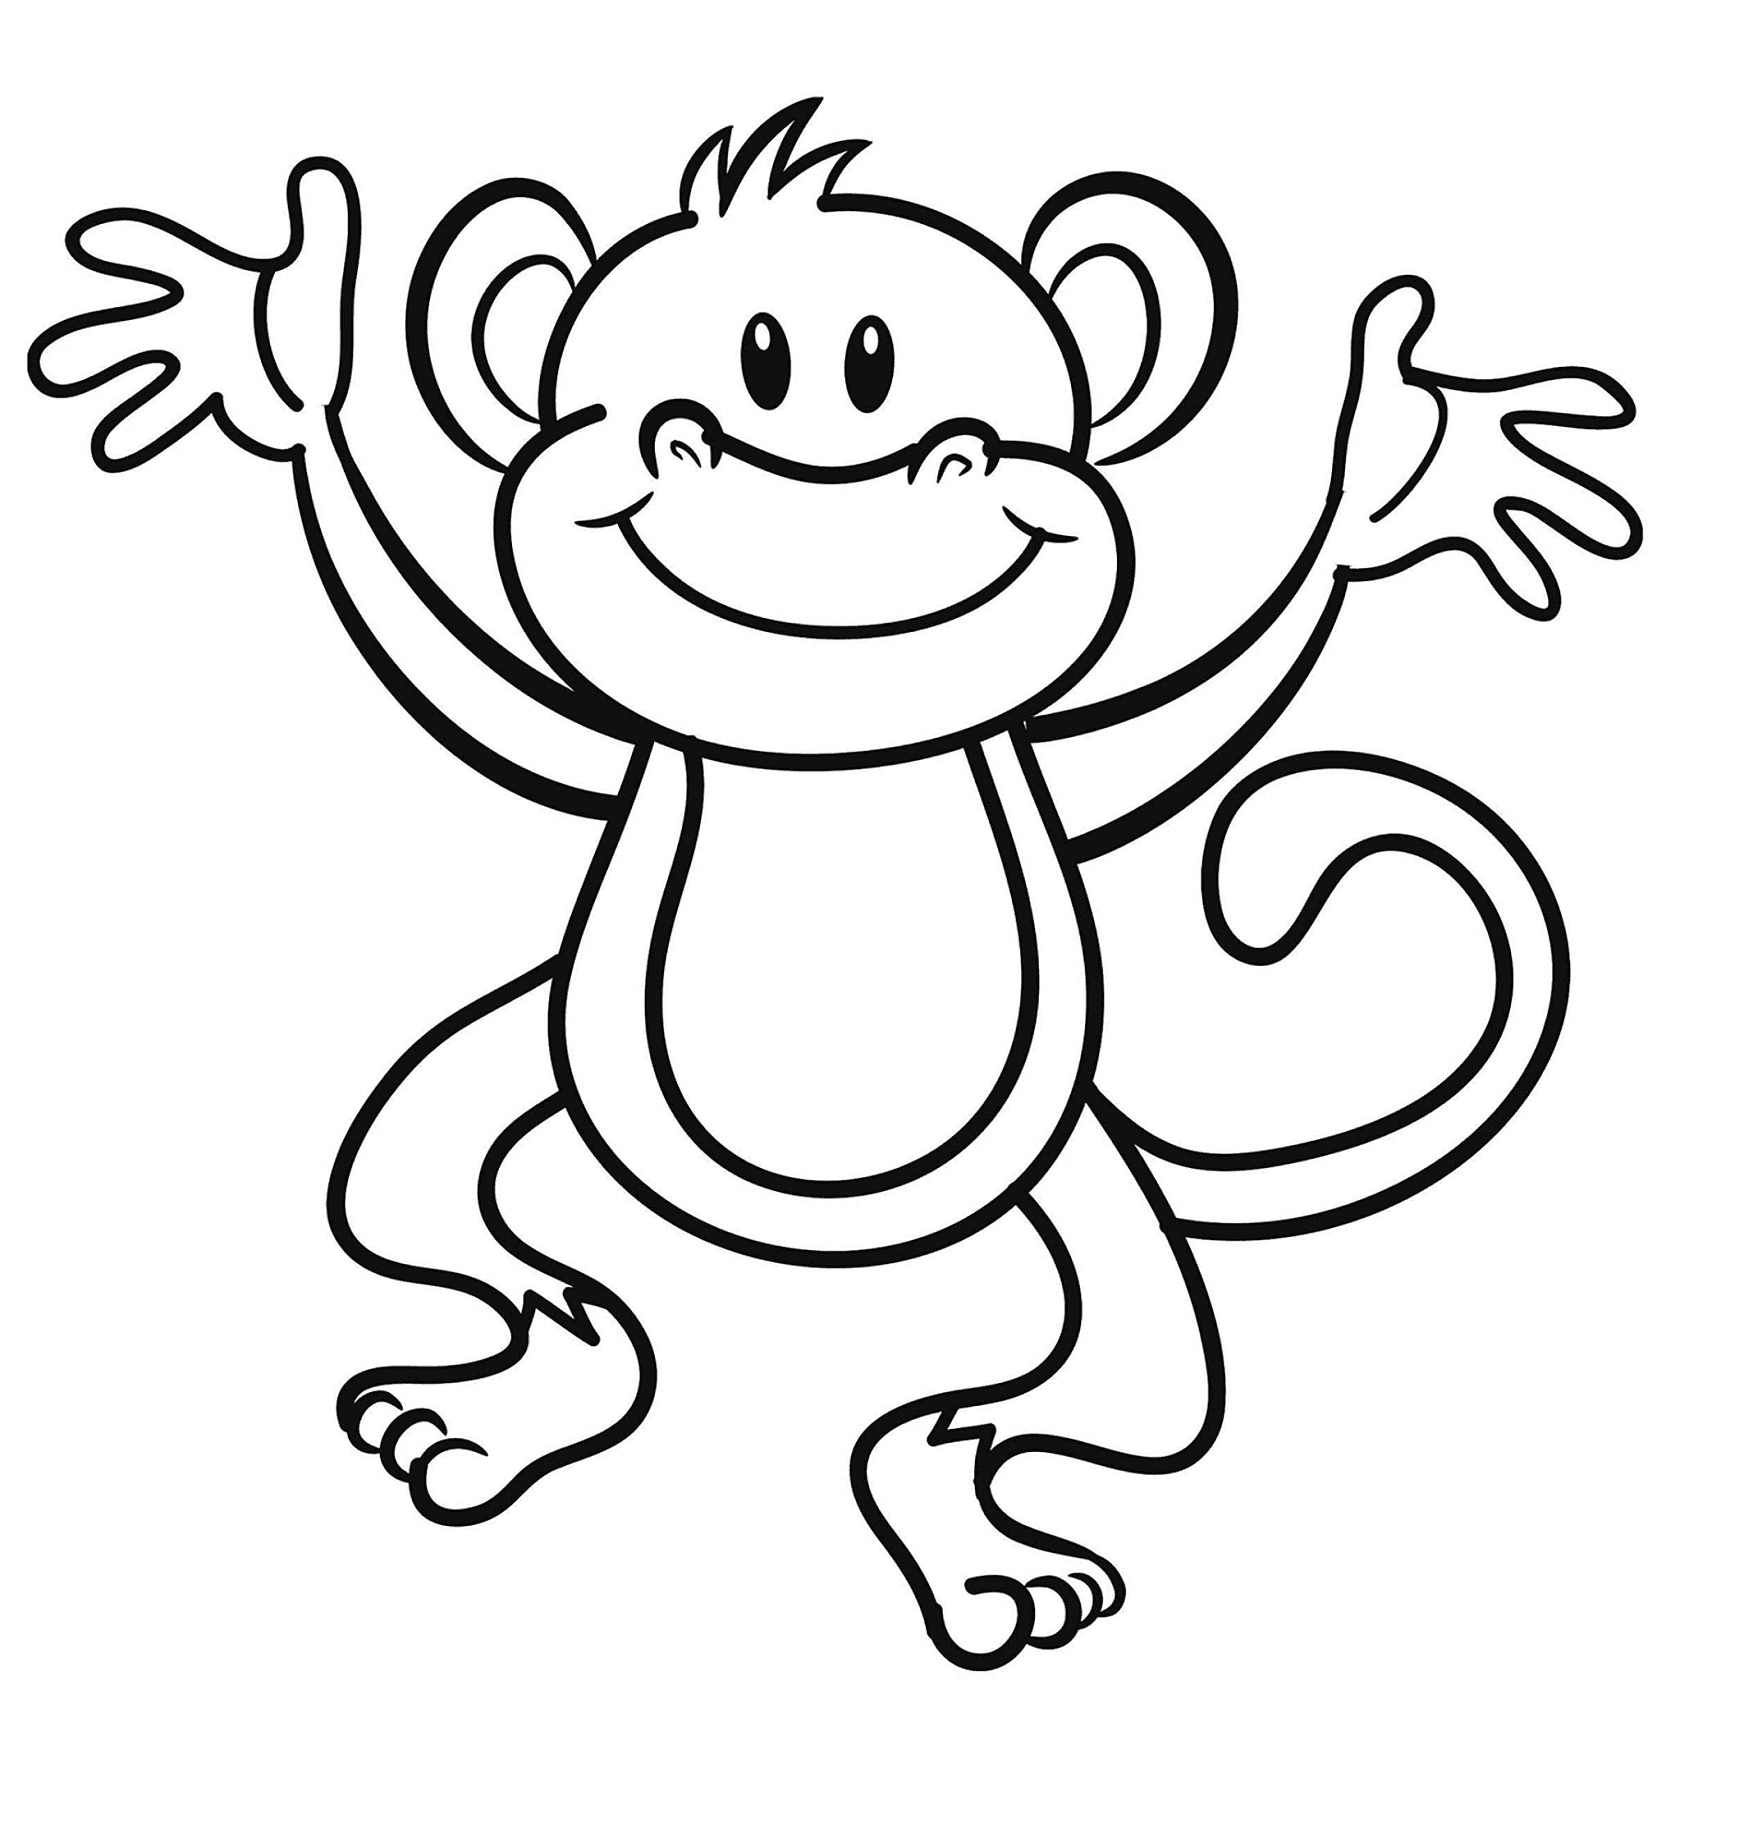 Smiling Monkey Coloring Pages   Monkey Coloring Pages   Coloring ...